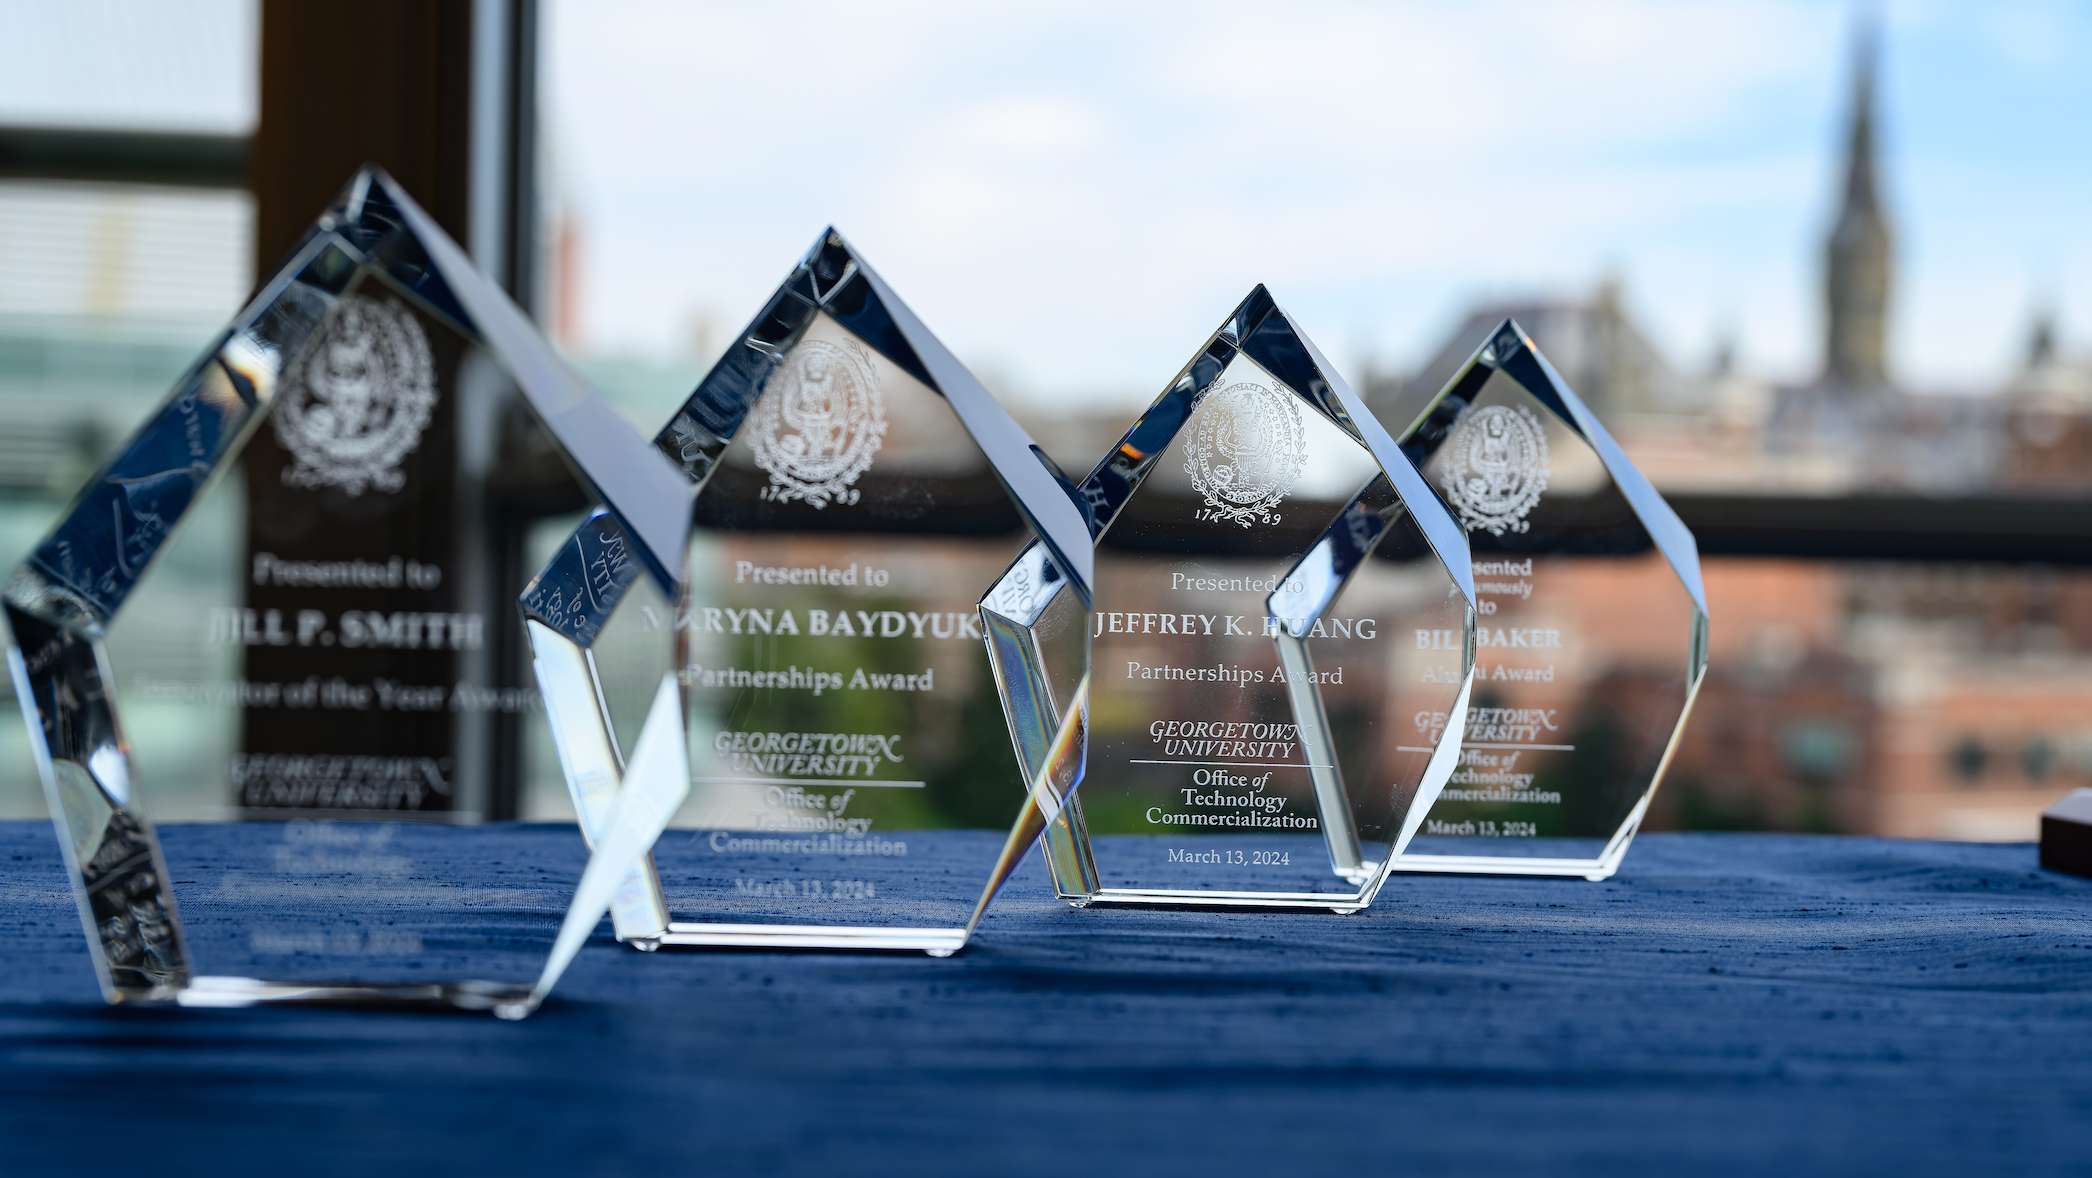 Glass awards arranged on a blue tablecloth. The out-of-focus outline of Healy Hall is in the background.